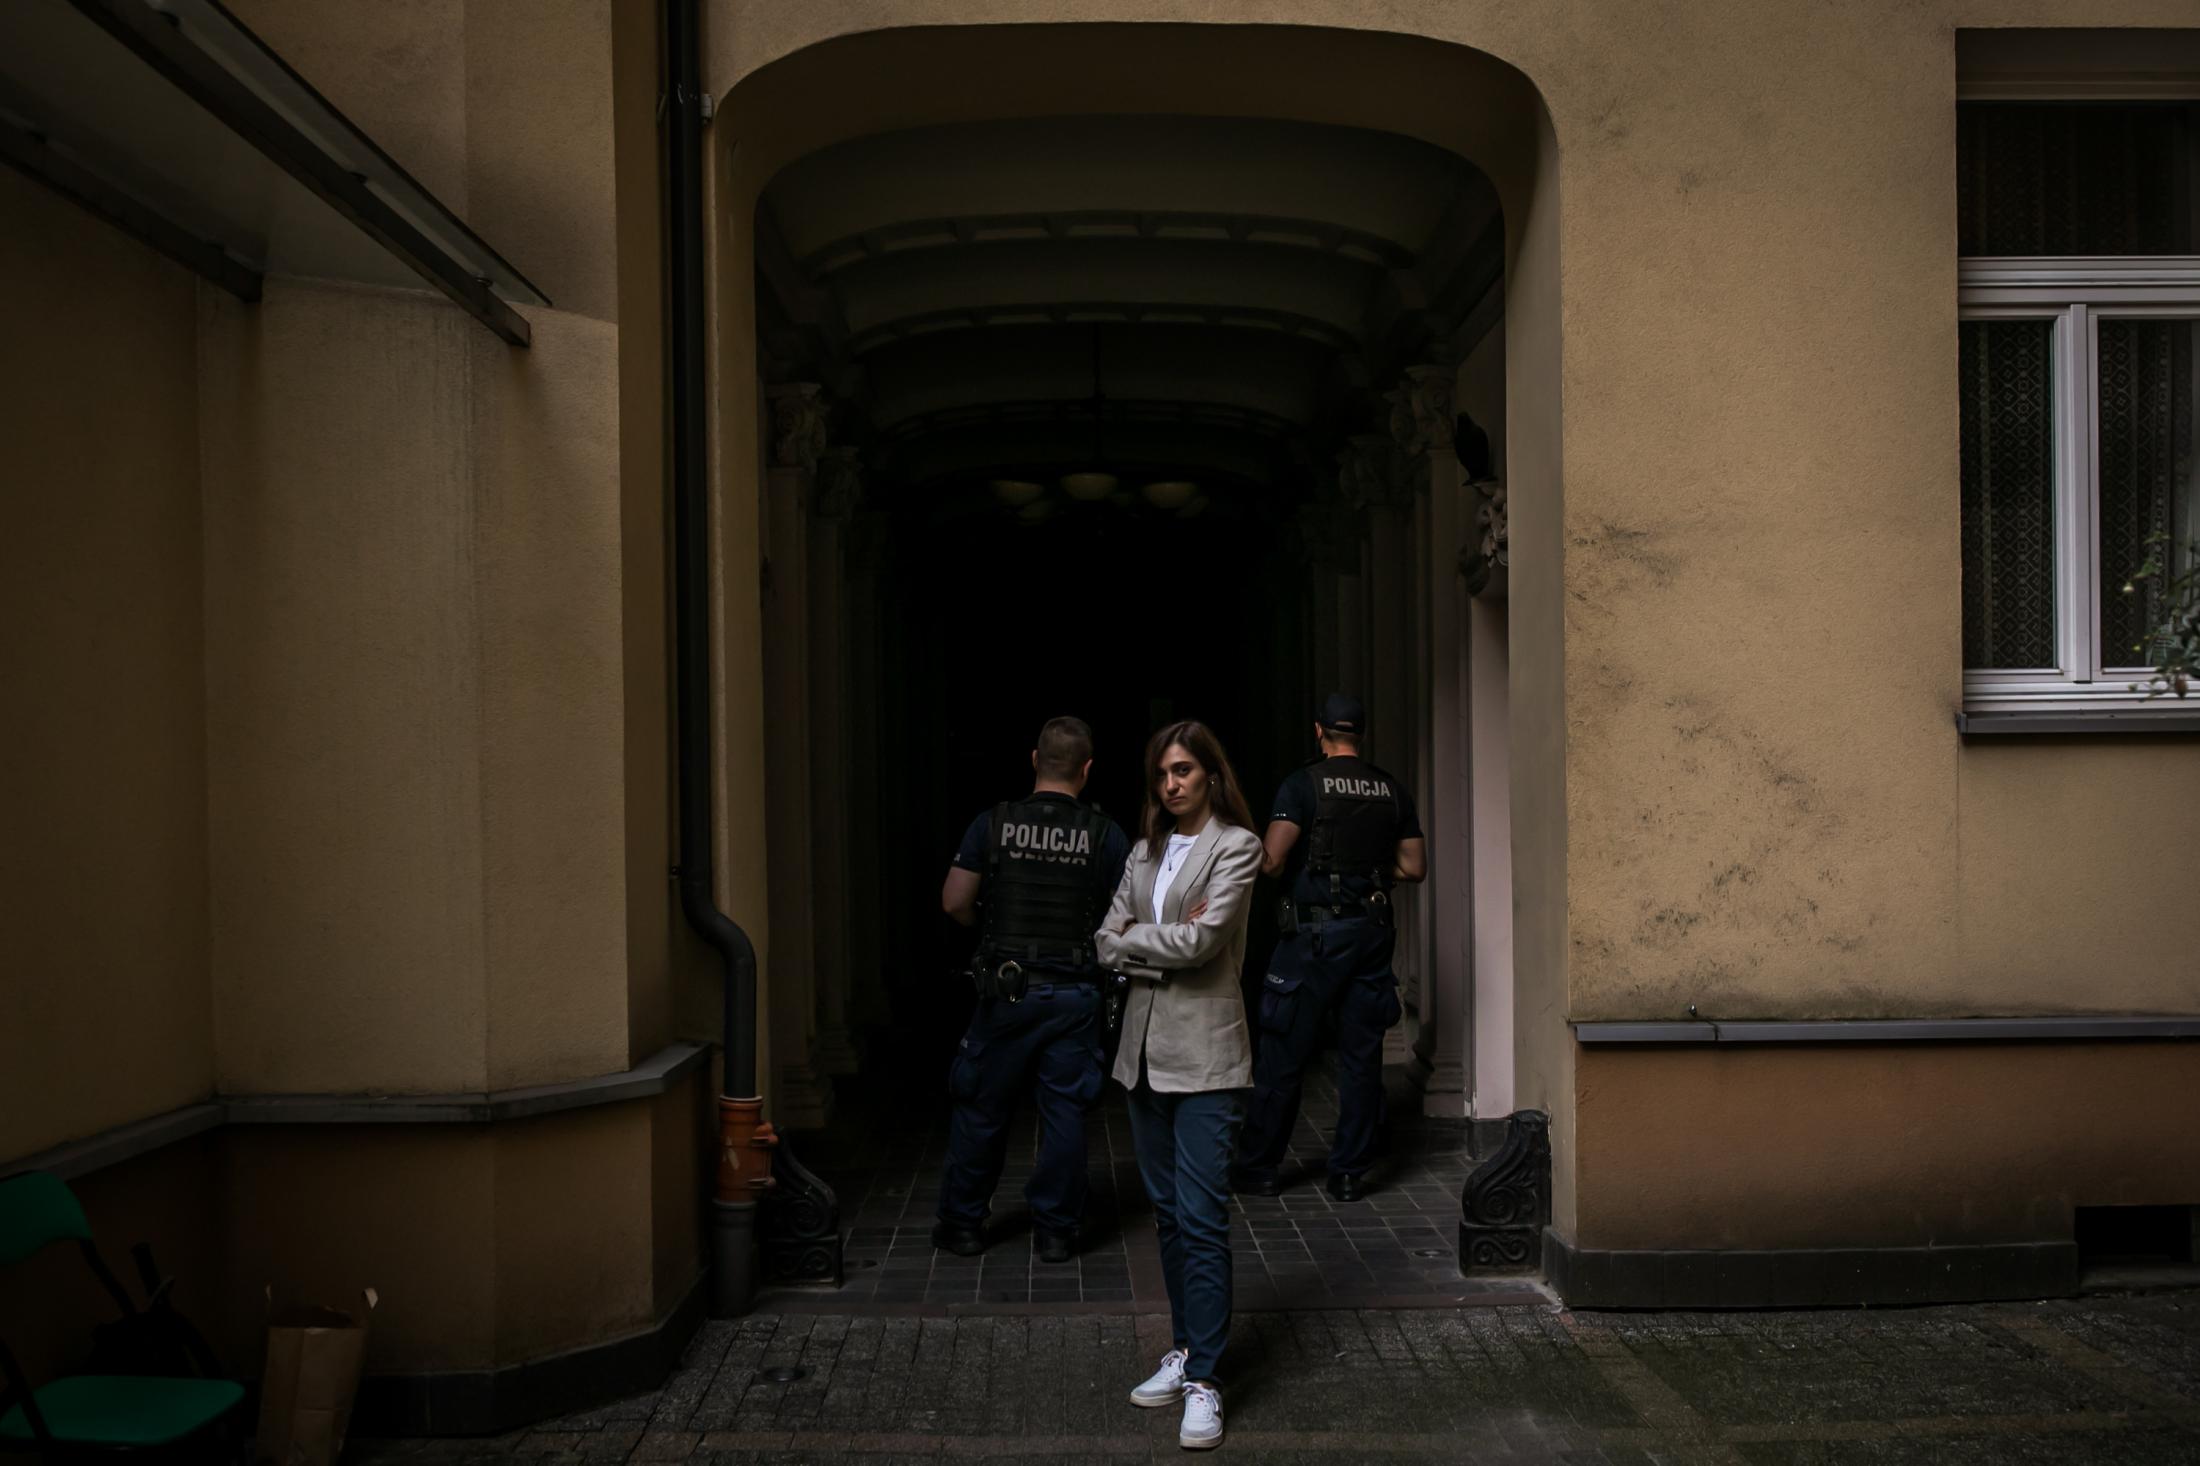 Anastasiya Kozhapenka, a 30-year-old volunteer at the Belarusian community center who was just 6 when she attended her first protest against Alexander Lukashenko. Warsaw, Poland.